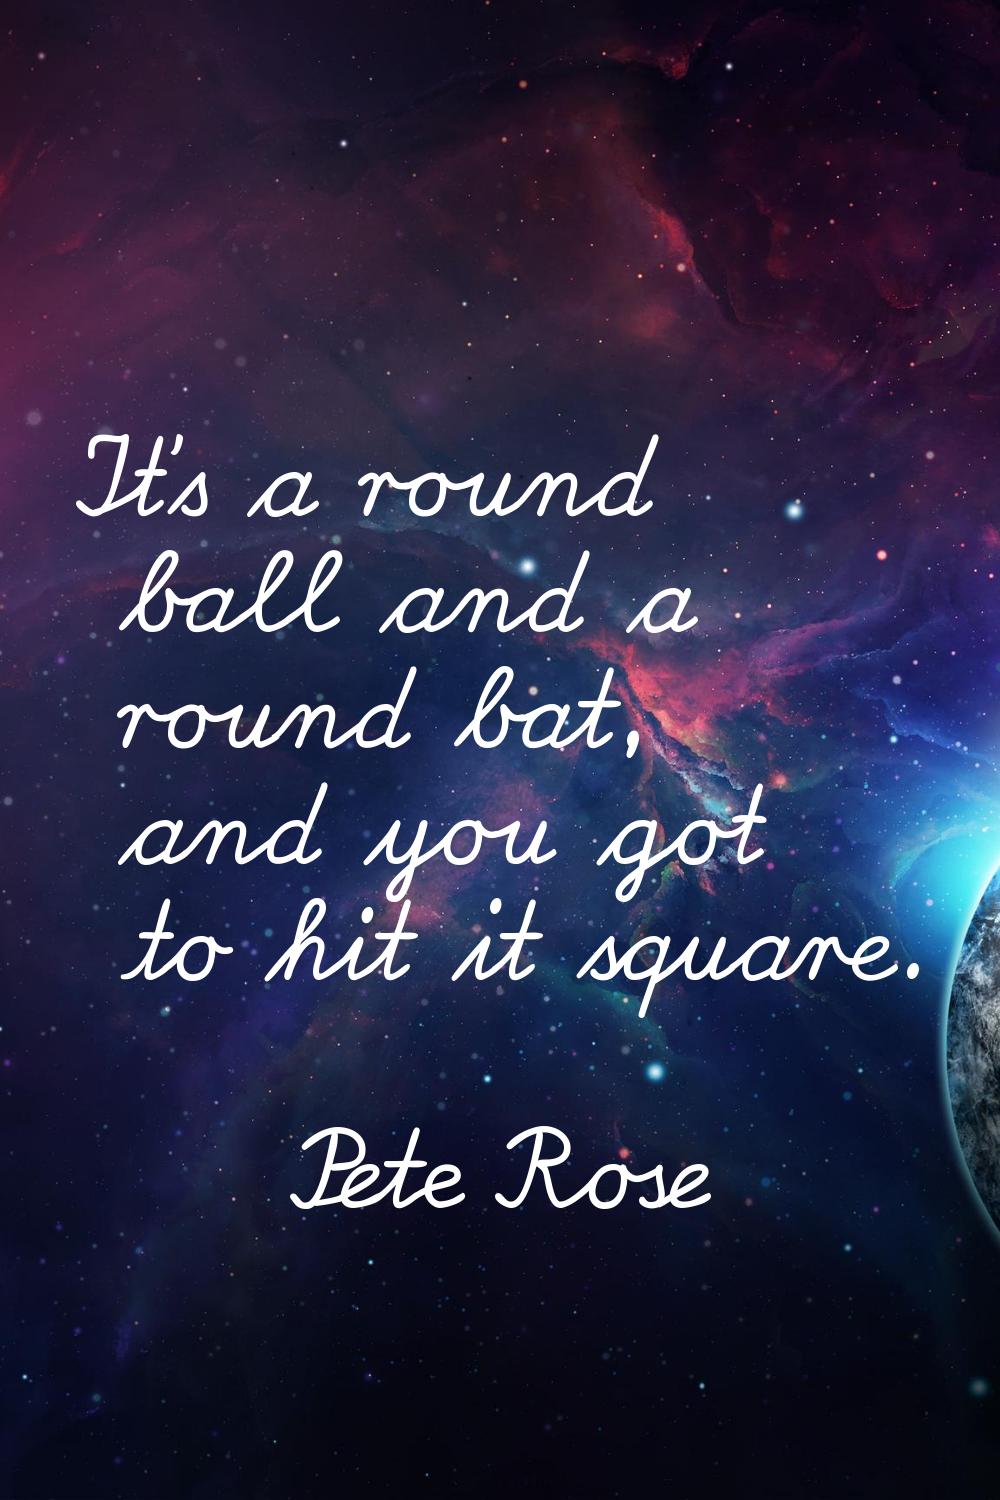 It's a round ball and a round bat, and you got to hit it square.